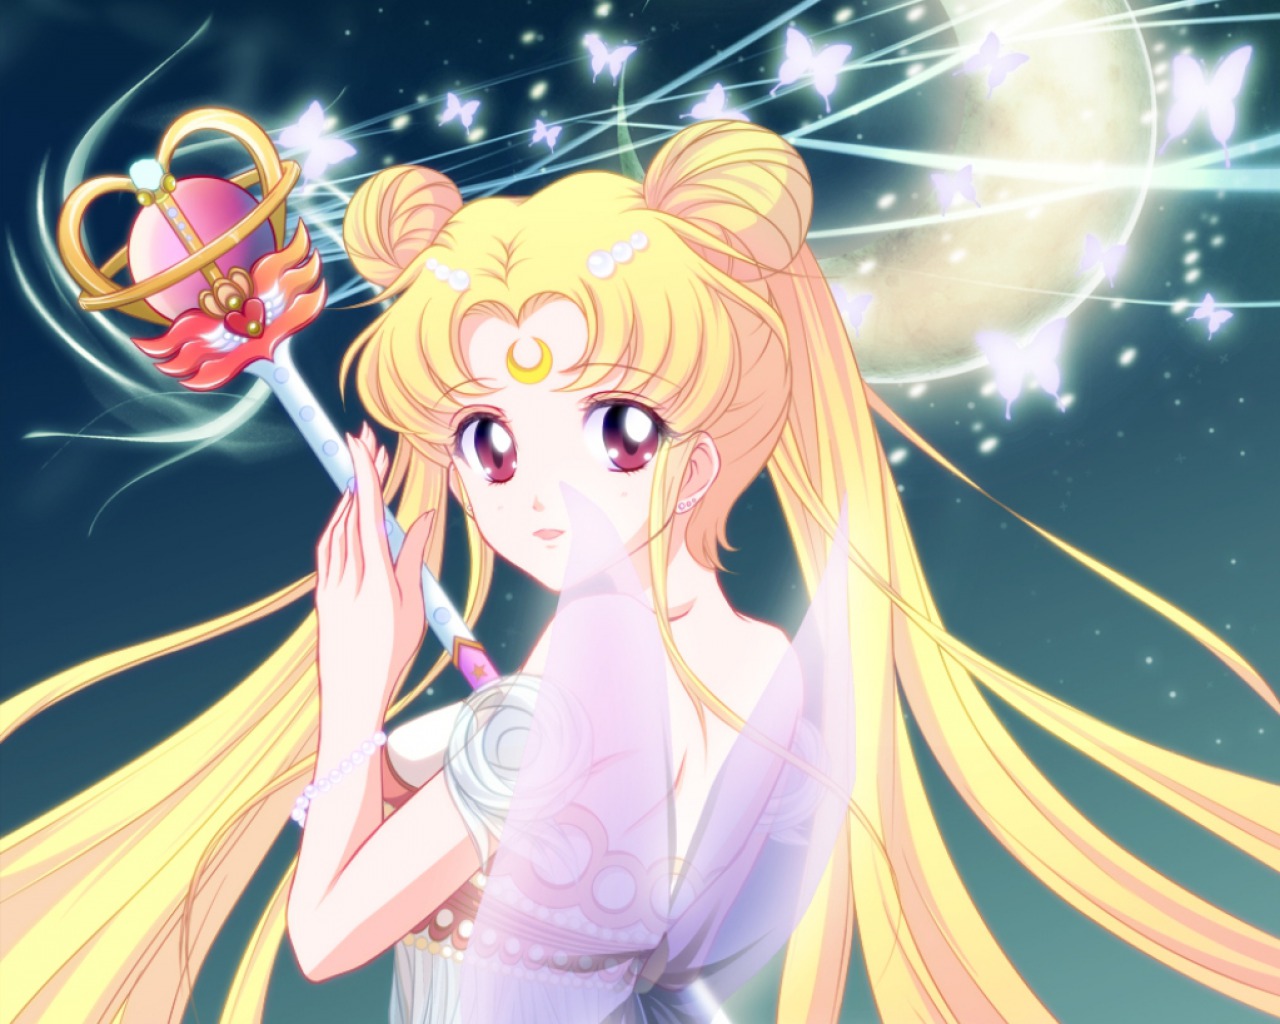 Sailor Moon Crystal Images on Fanpop.